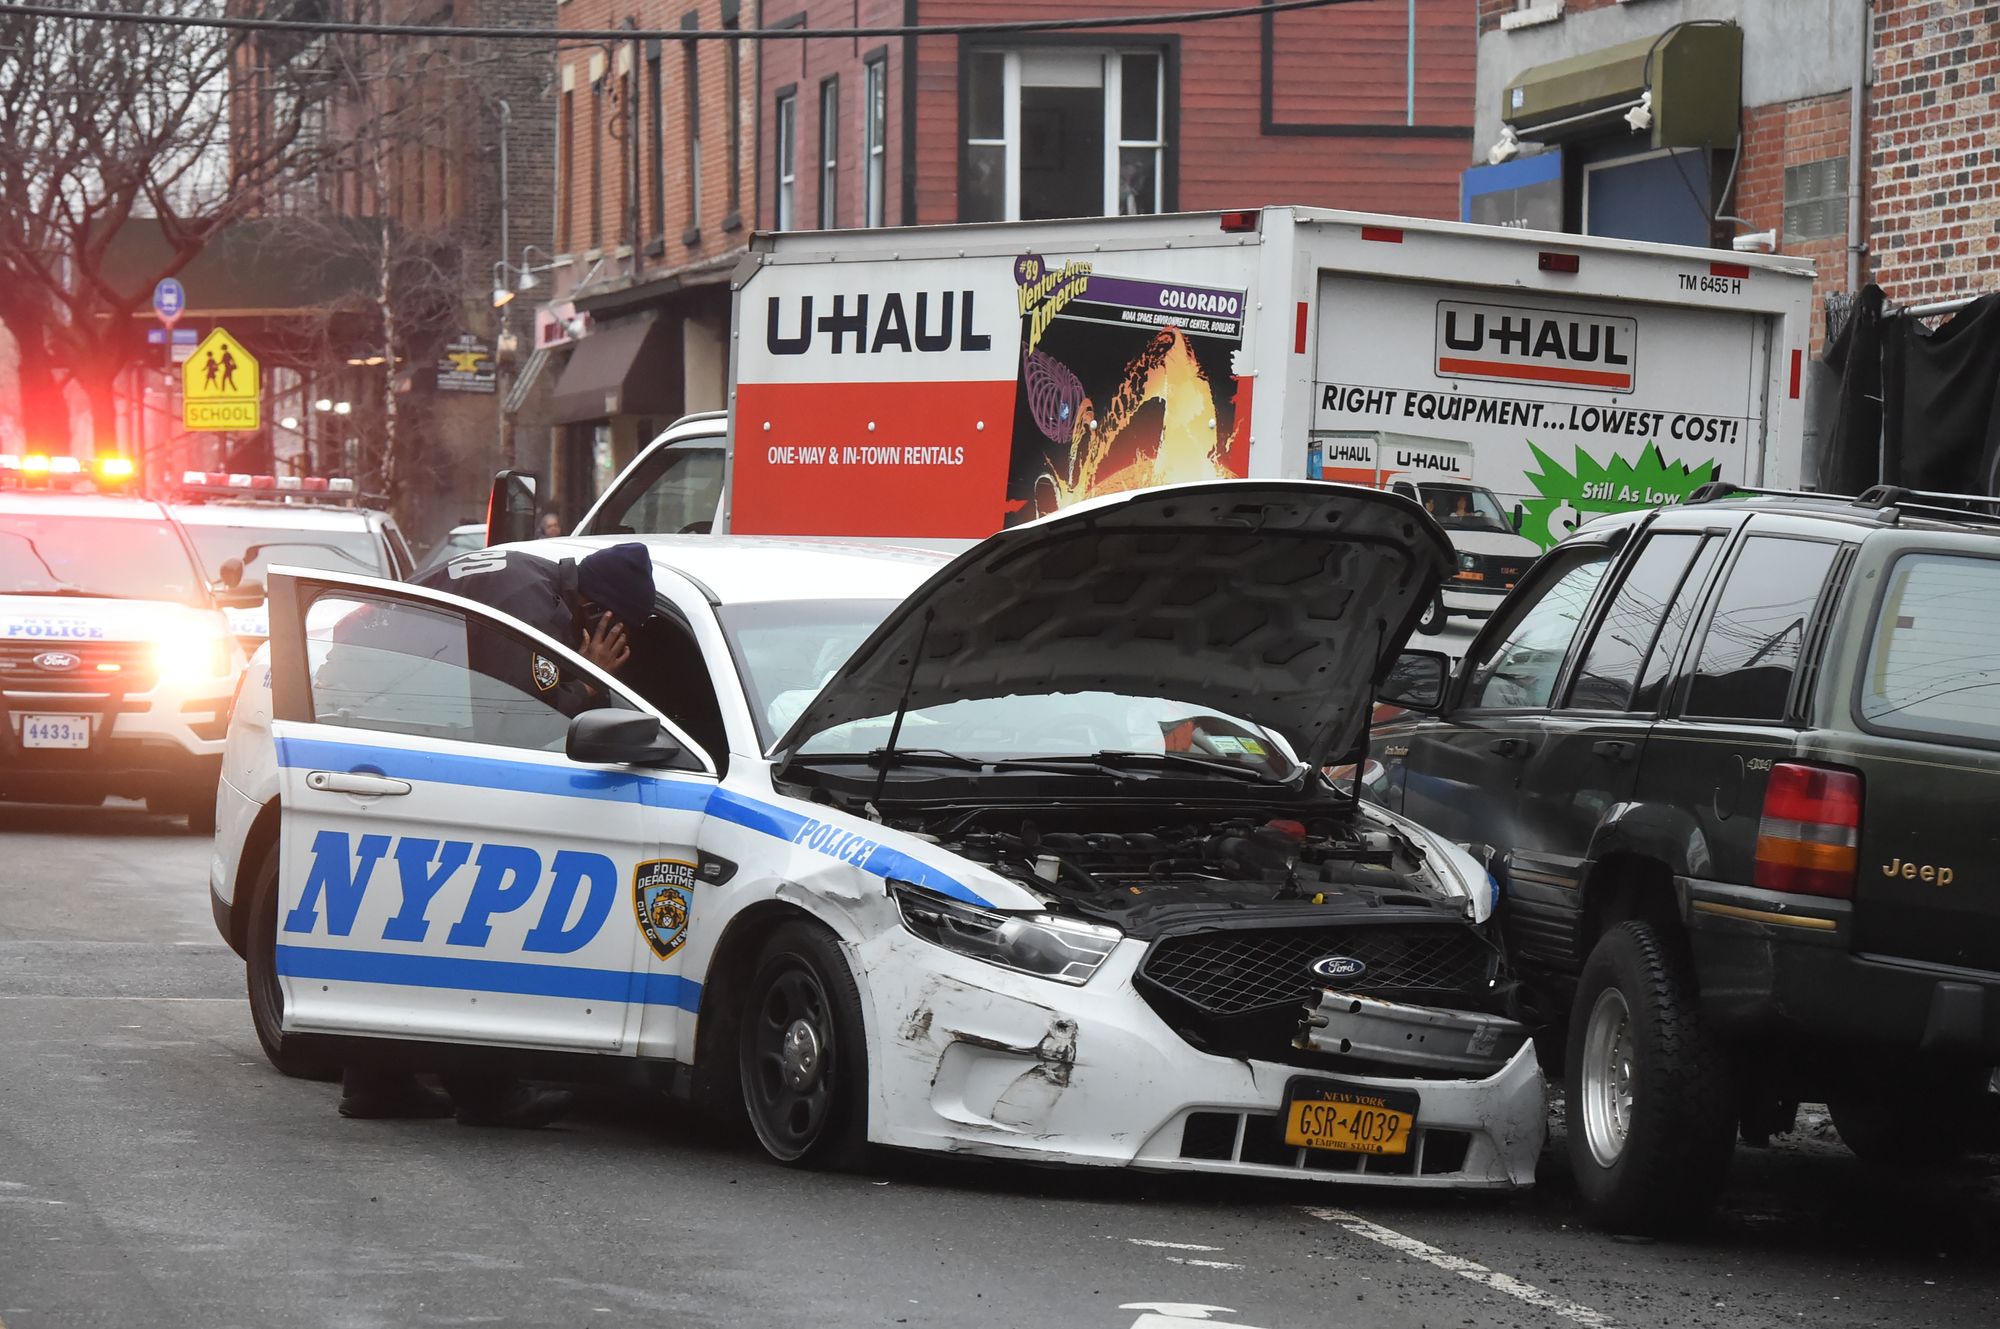 Red Hook Pile Up – Cop Car Crash Trying To Stop Illegal Vehicle